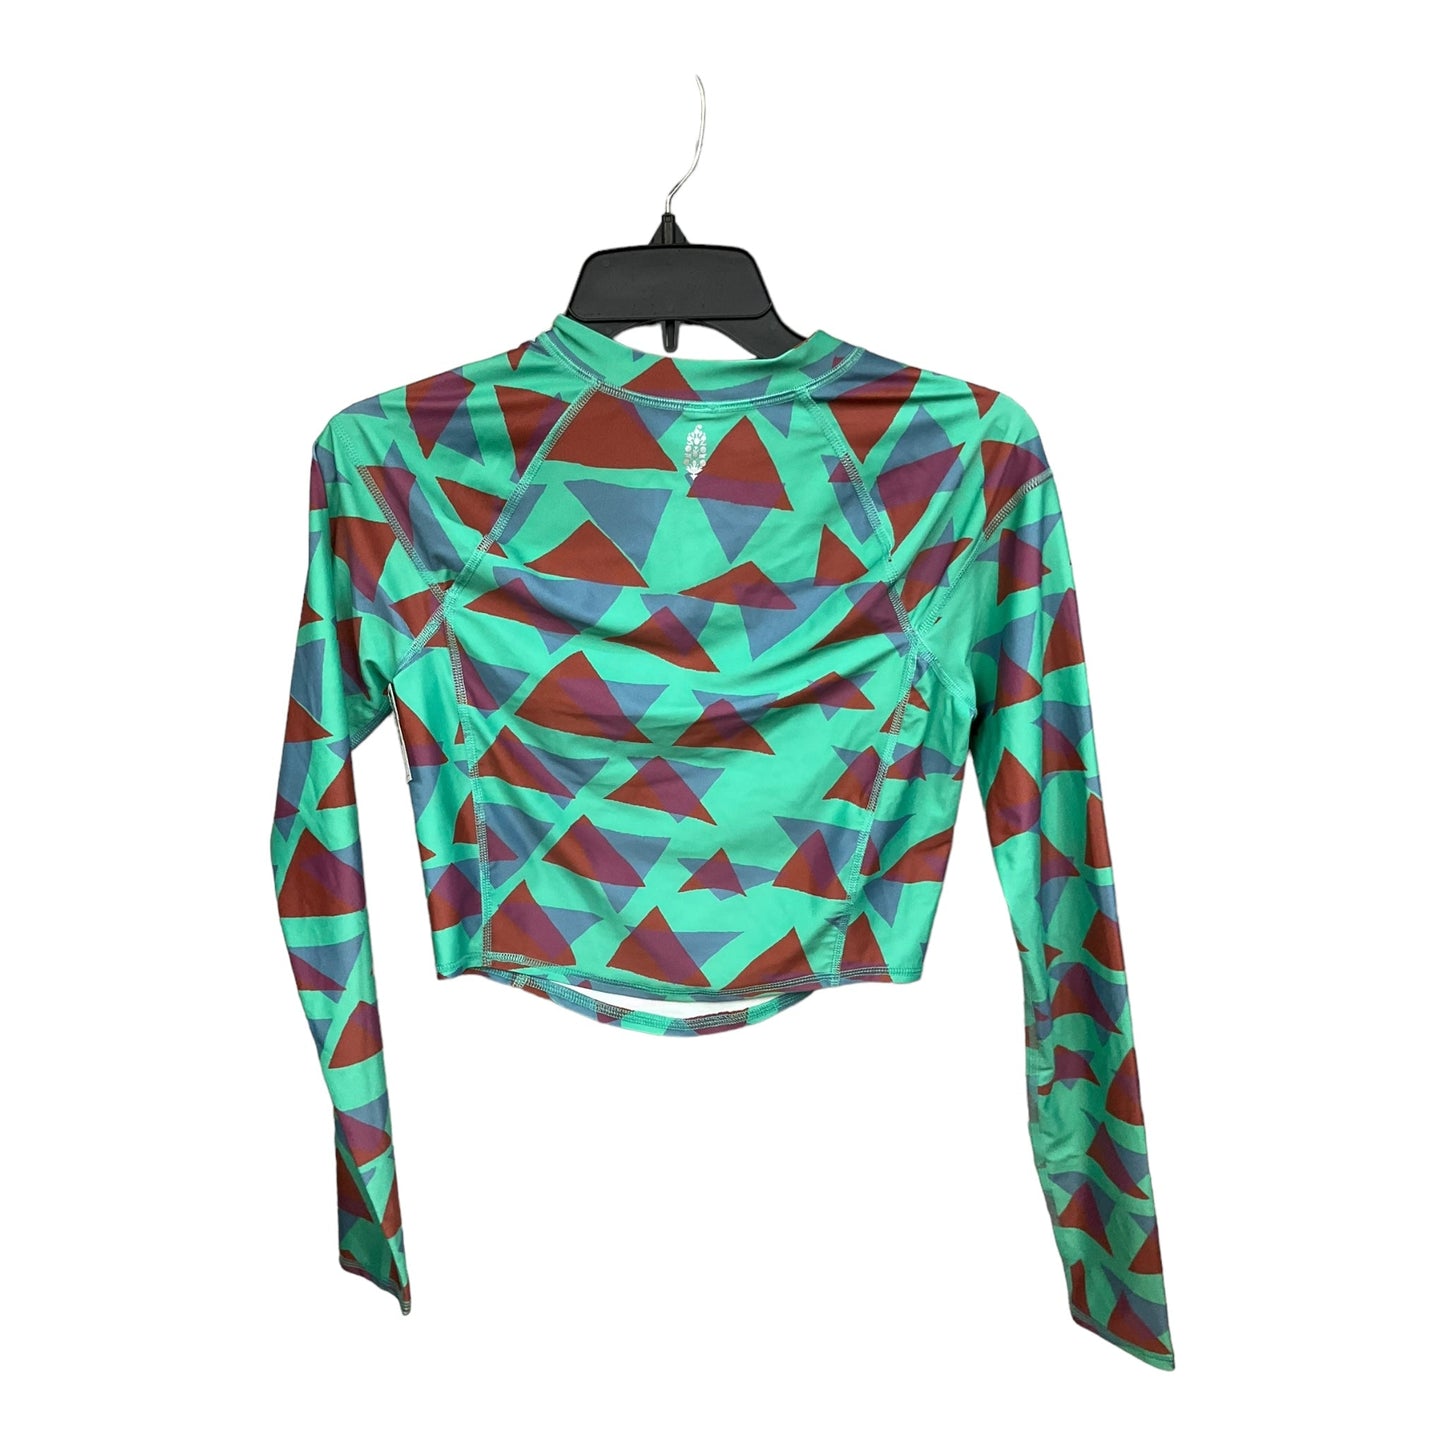 Geometric Pattern Athletic Top Long Sleeve Collar Free People, Size S